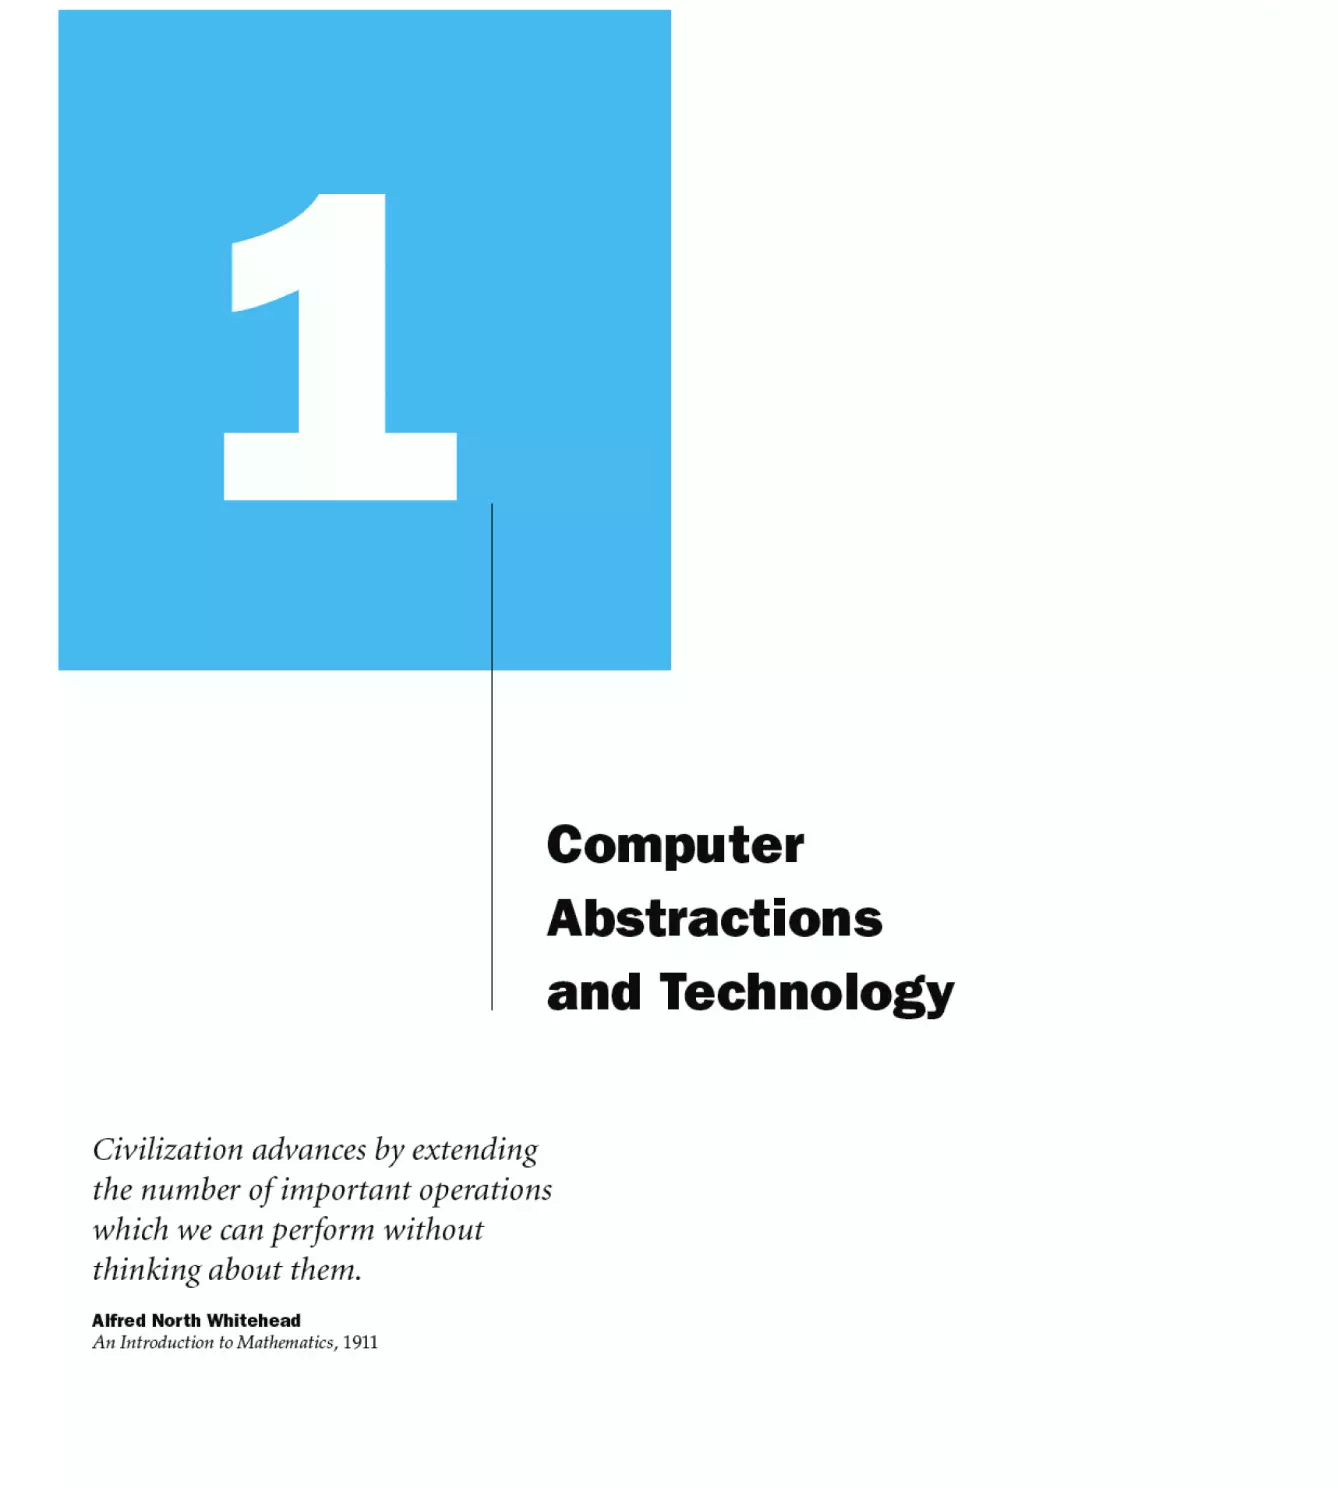 1. Computer Abstractions and Technology